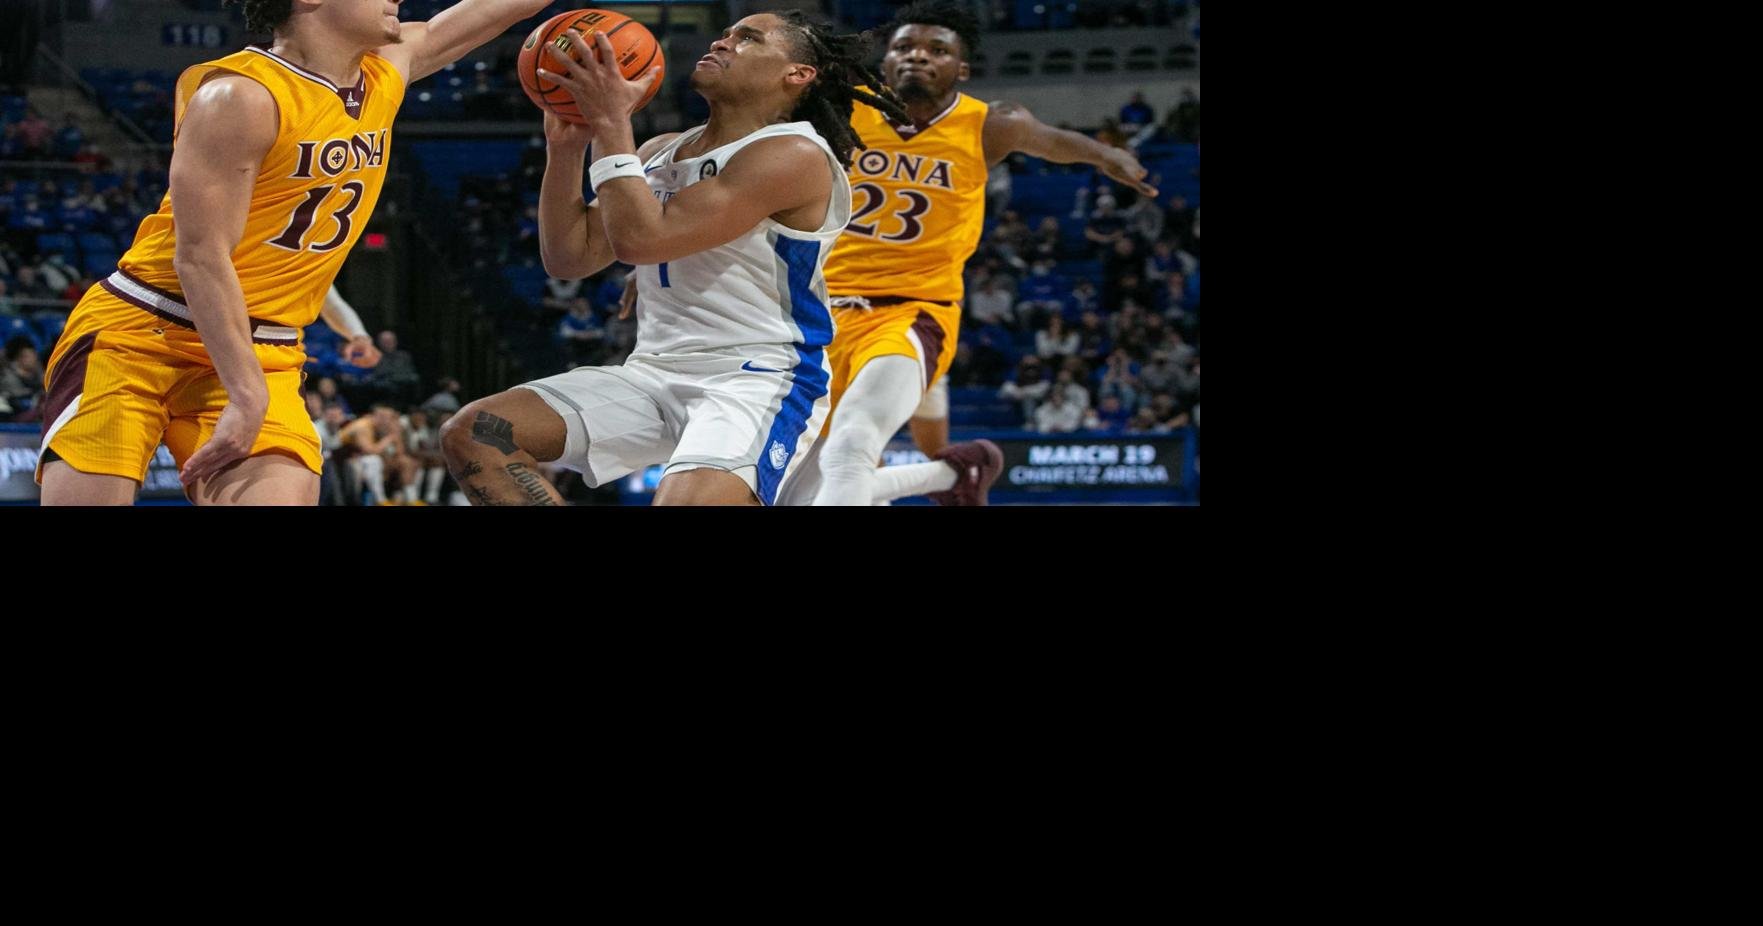 SLU racked up wins but remained short of NCAA Tournament